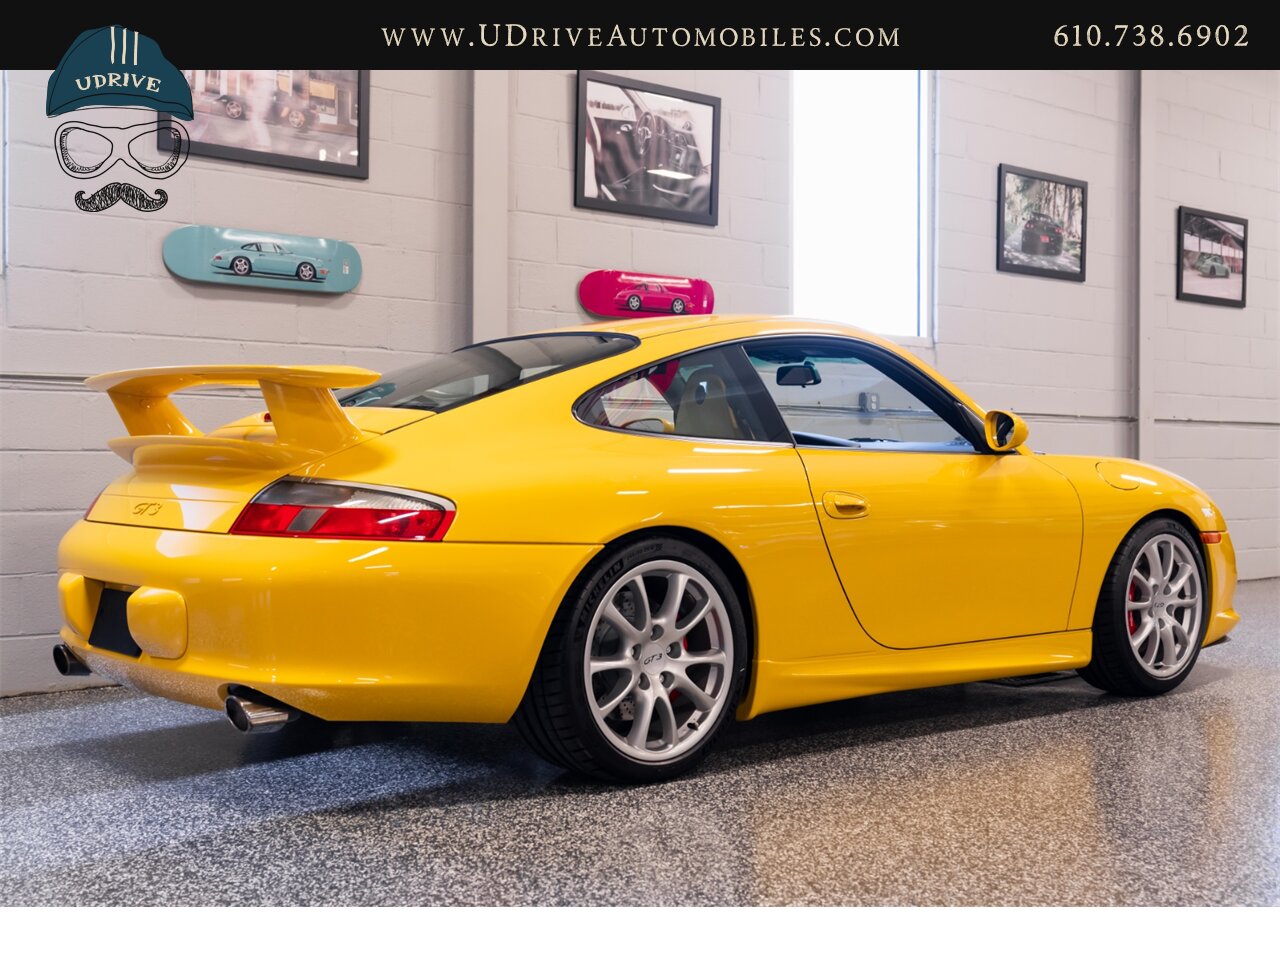 2005 Porsche 911 GT3 996 Speed Yellow Sport Seats Pntd Hardbacks  Pntd Console Deviating Stitch Yellow Accents Throughout - Photo 22 - West Chester, PA 19382